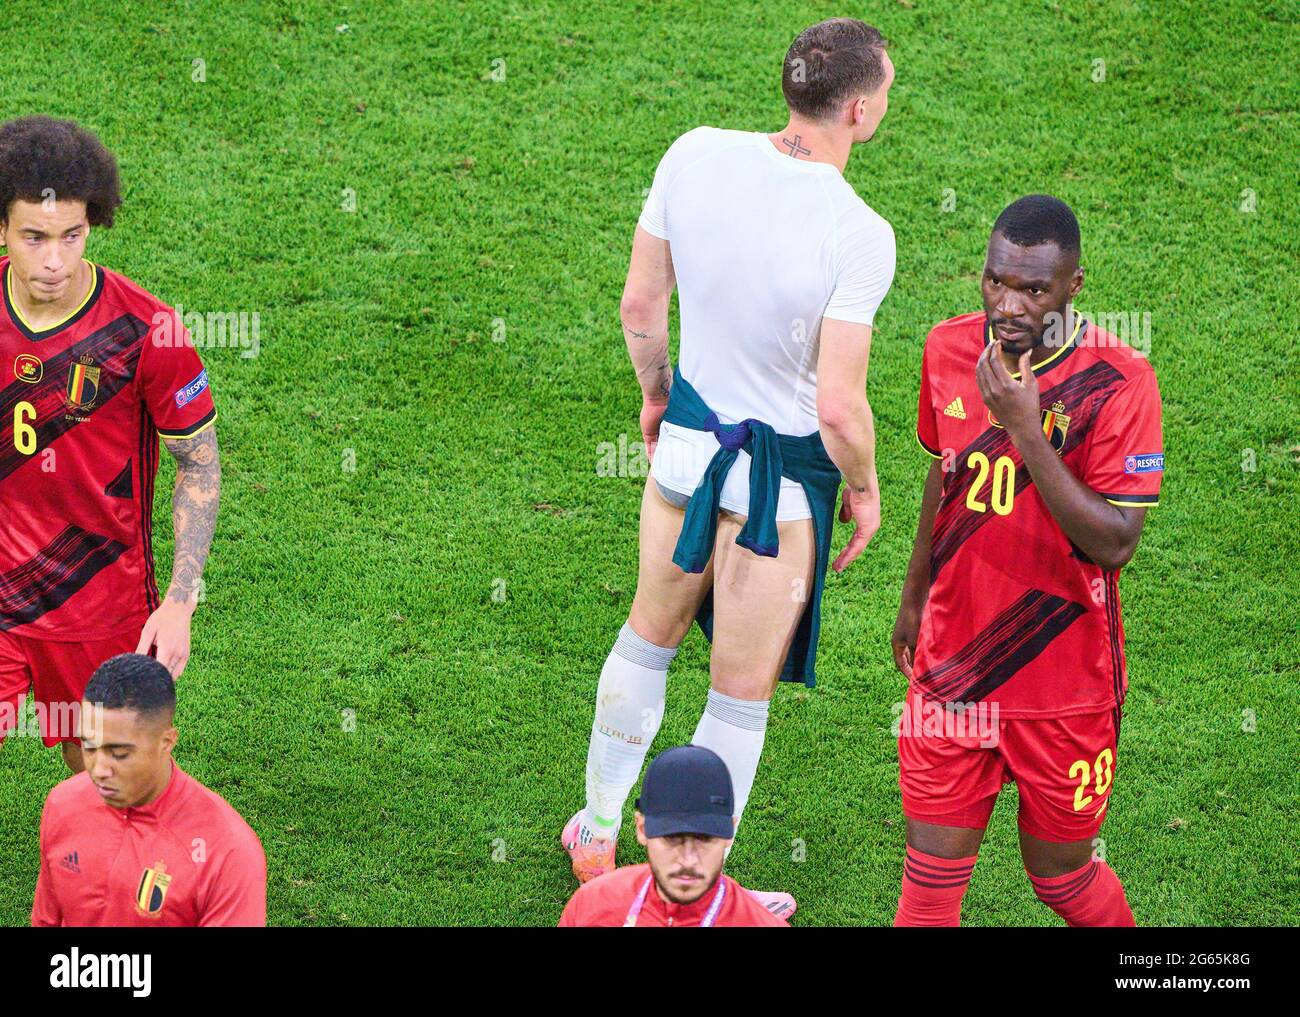 Alessandro Bastoni, ITA 23 without jersey and trousers, Axel WITSEL, Belgium Nr.6 Christian Benteke, Belgium Nr.20  in the quarterfinal match BELGIUM - ITALY  at the football UEFA European Championships 2020 in Season 2020/2021 on July 02, 2021  in Munich, Germany. © Peter Schatz / Alamy Live News Stock Photo